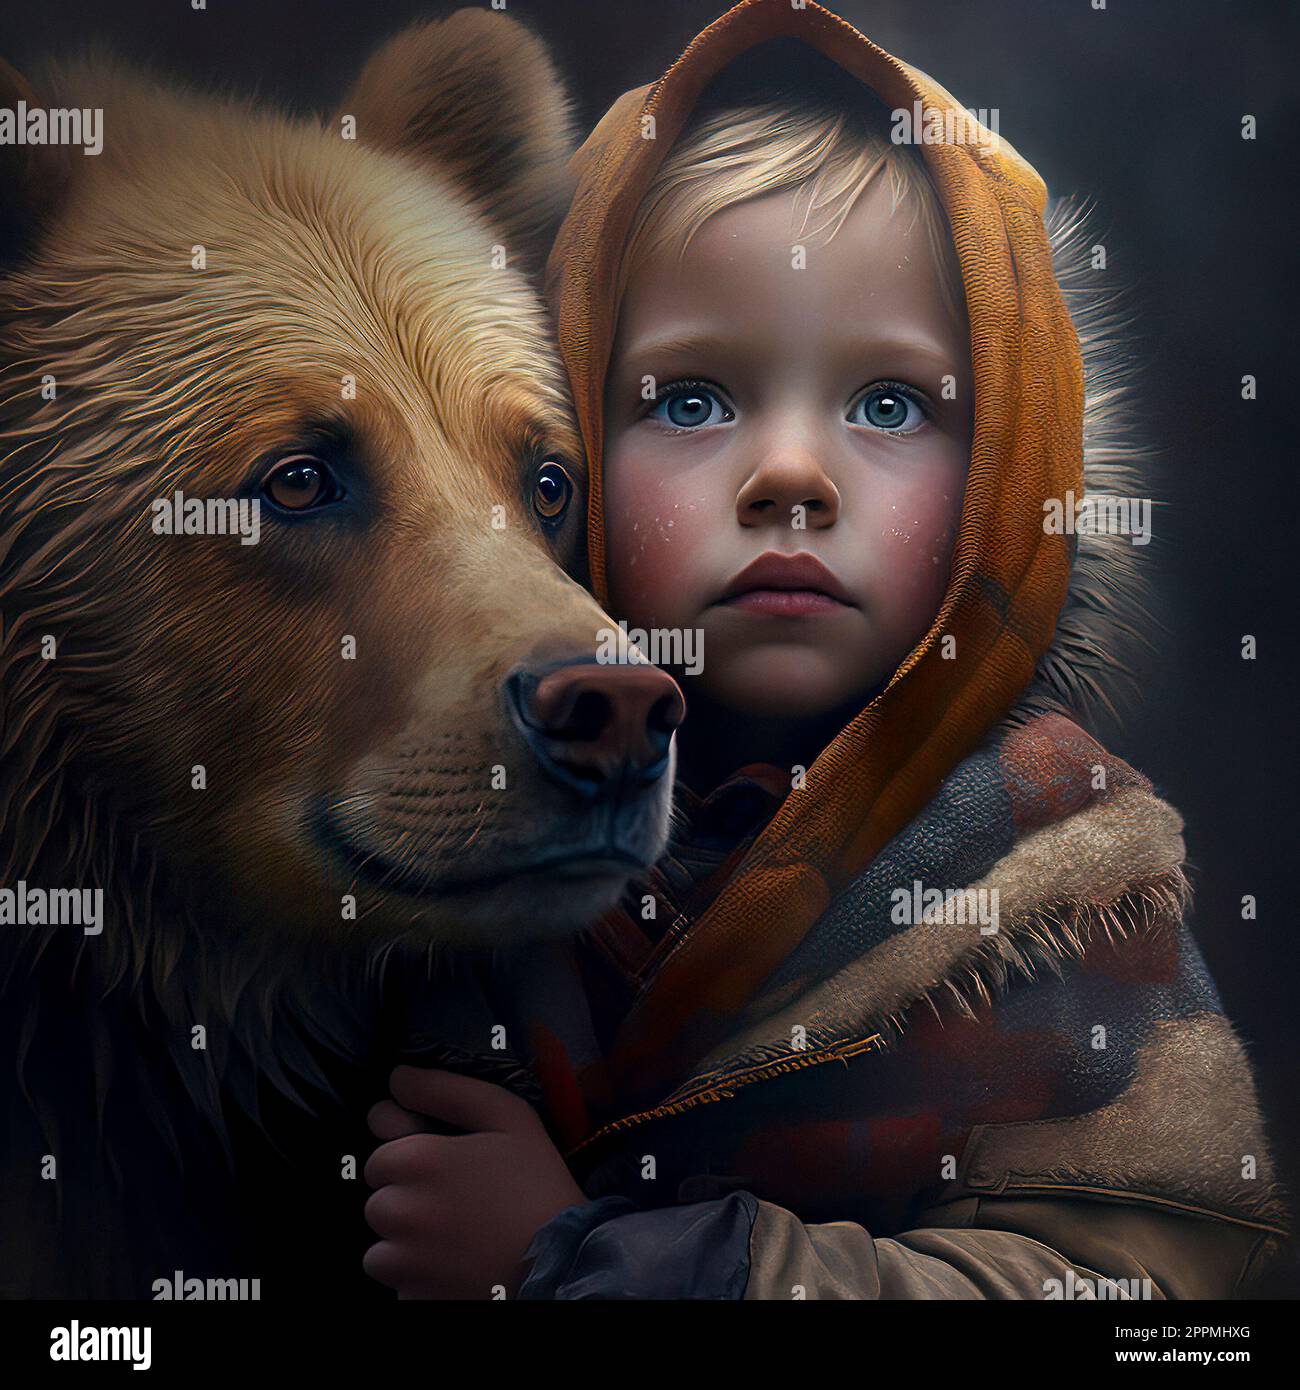 A Young Girl in a Yellow Hood Embraces a Large Brown Bear in a Heartwarming Moment of Friendship and Affection Stock Photo